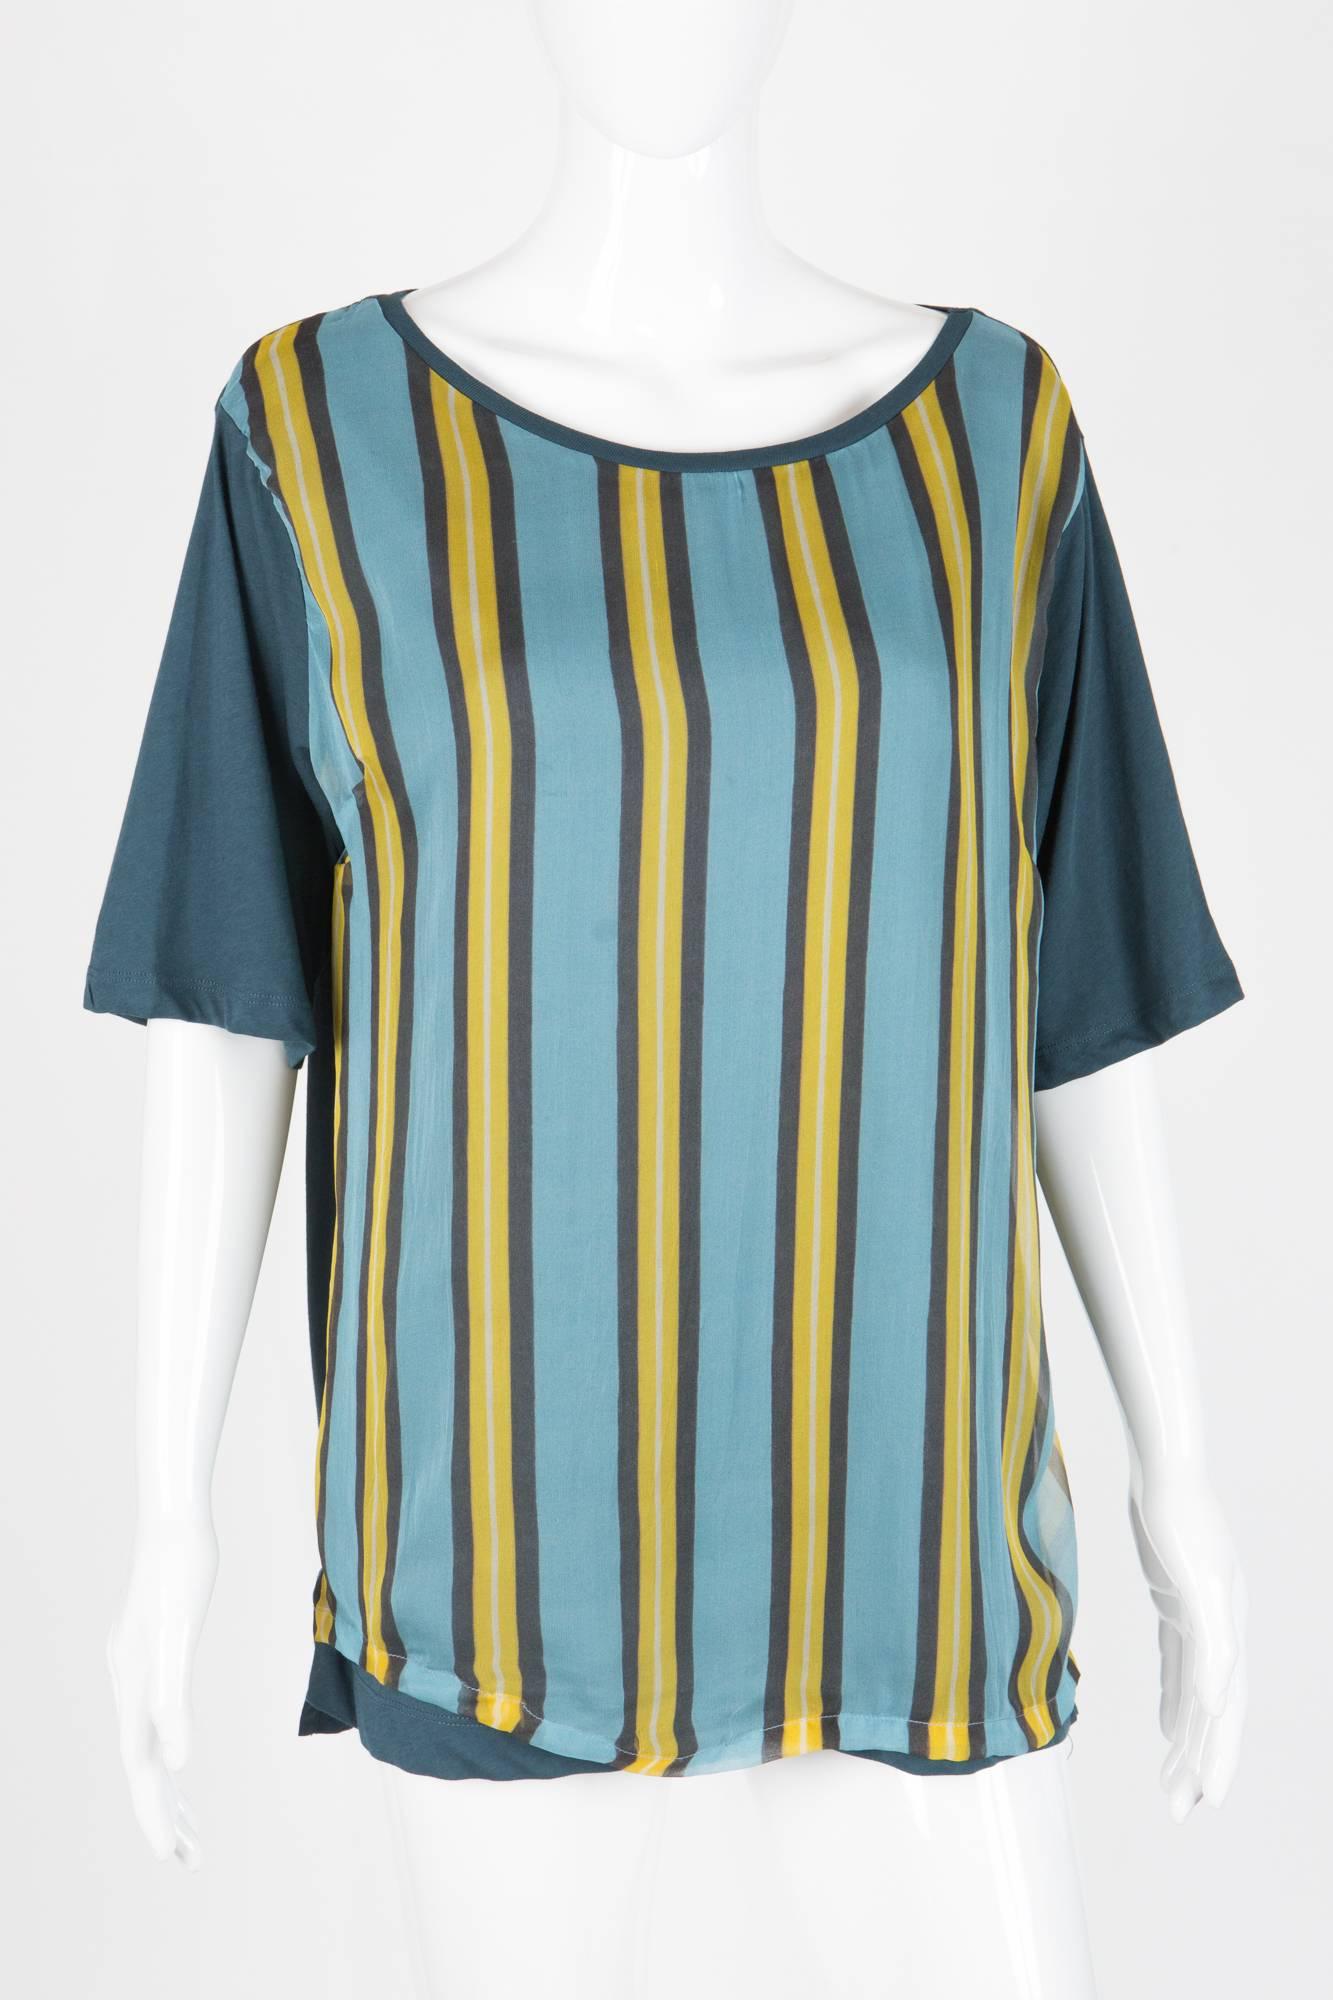 Blue and multi stripy Dries Van Noten top featuring able jersey top with a stripy silk jersey double front, sides slits. (82% cotton, 18% silk)
In excellent vintage condition. Made in France.
Label size Medium  
We guarantee you will receive this